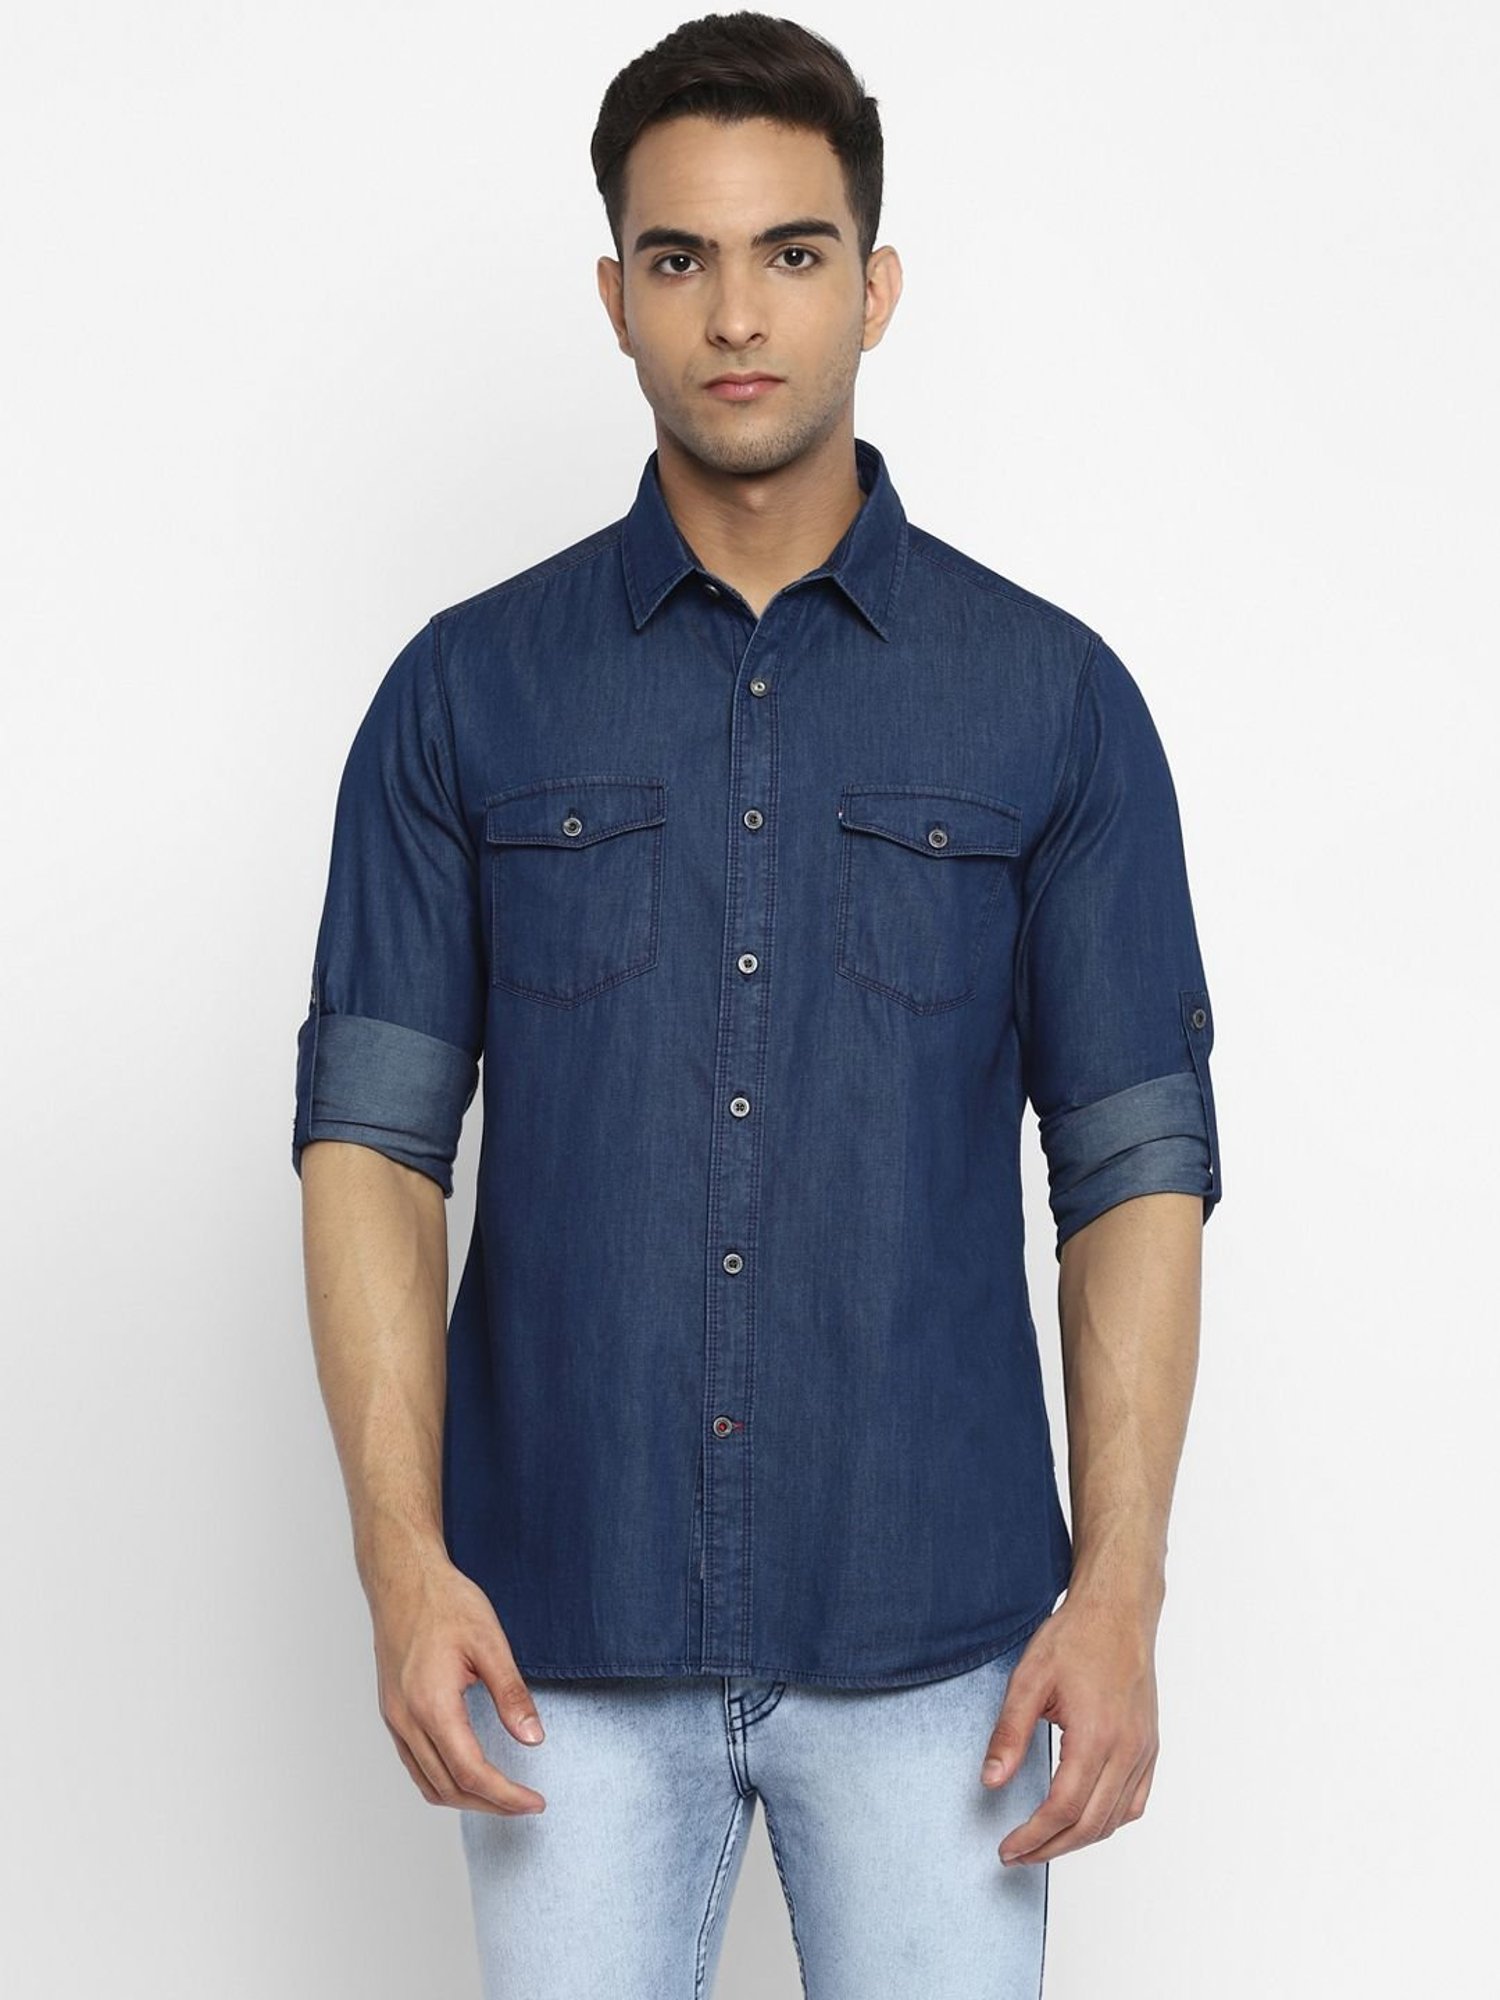 SNITCH Patch Work Dark Blue Denim Shirt Pure Cotton Slim Fit Shirt|Anti-Dust|Coin  Pocket |Two Patch Pocket |Comfort Stretch : Amazon.in: Clothing &  Accessories